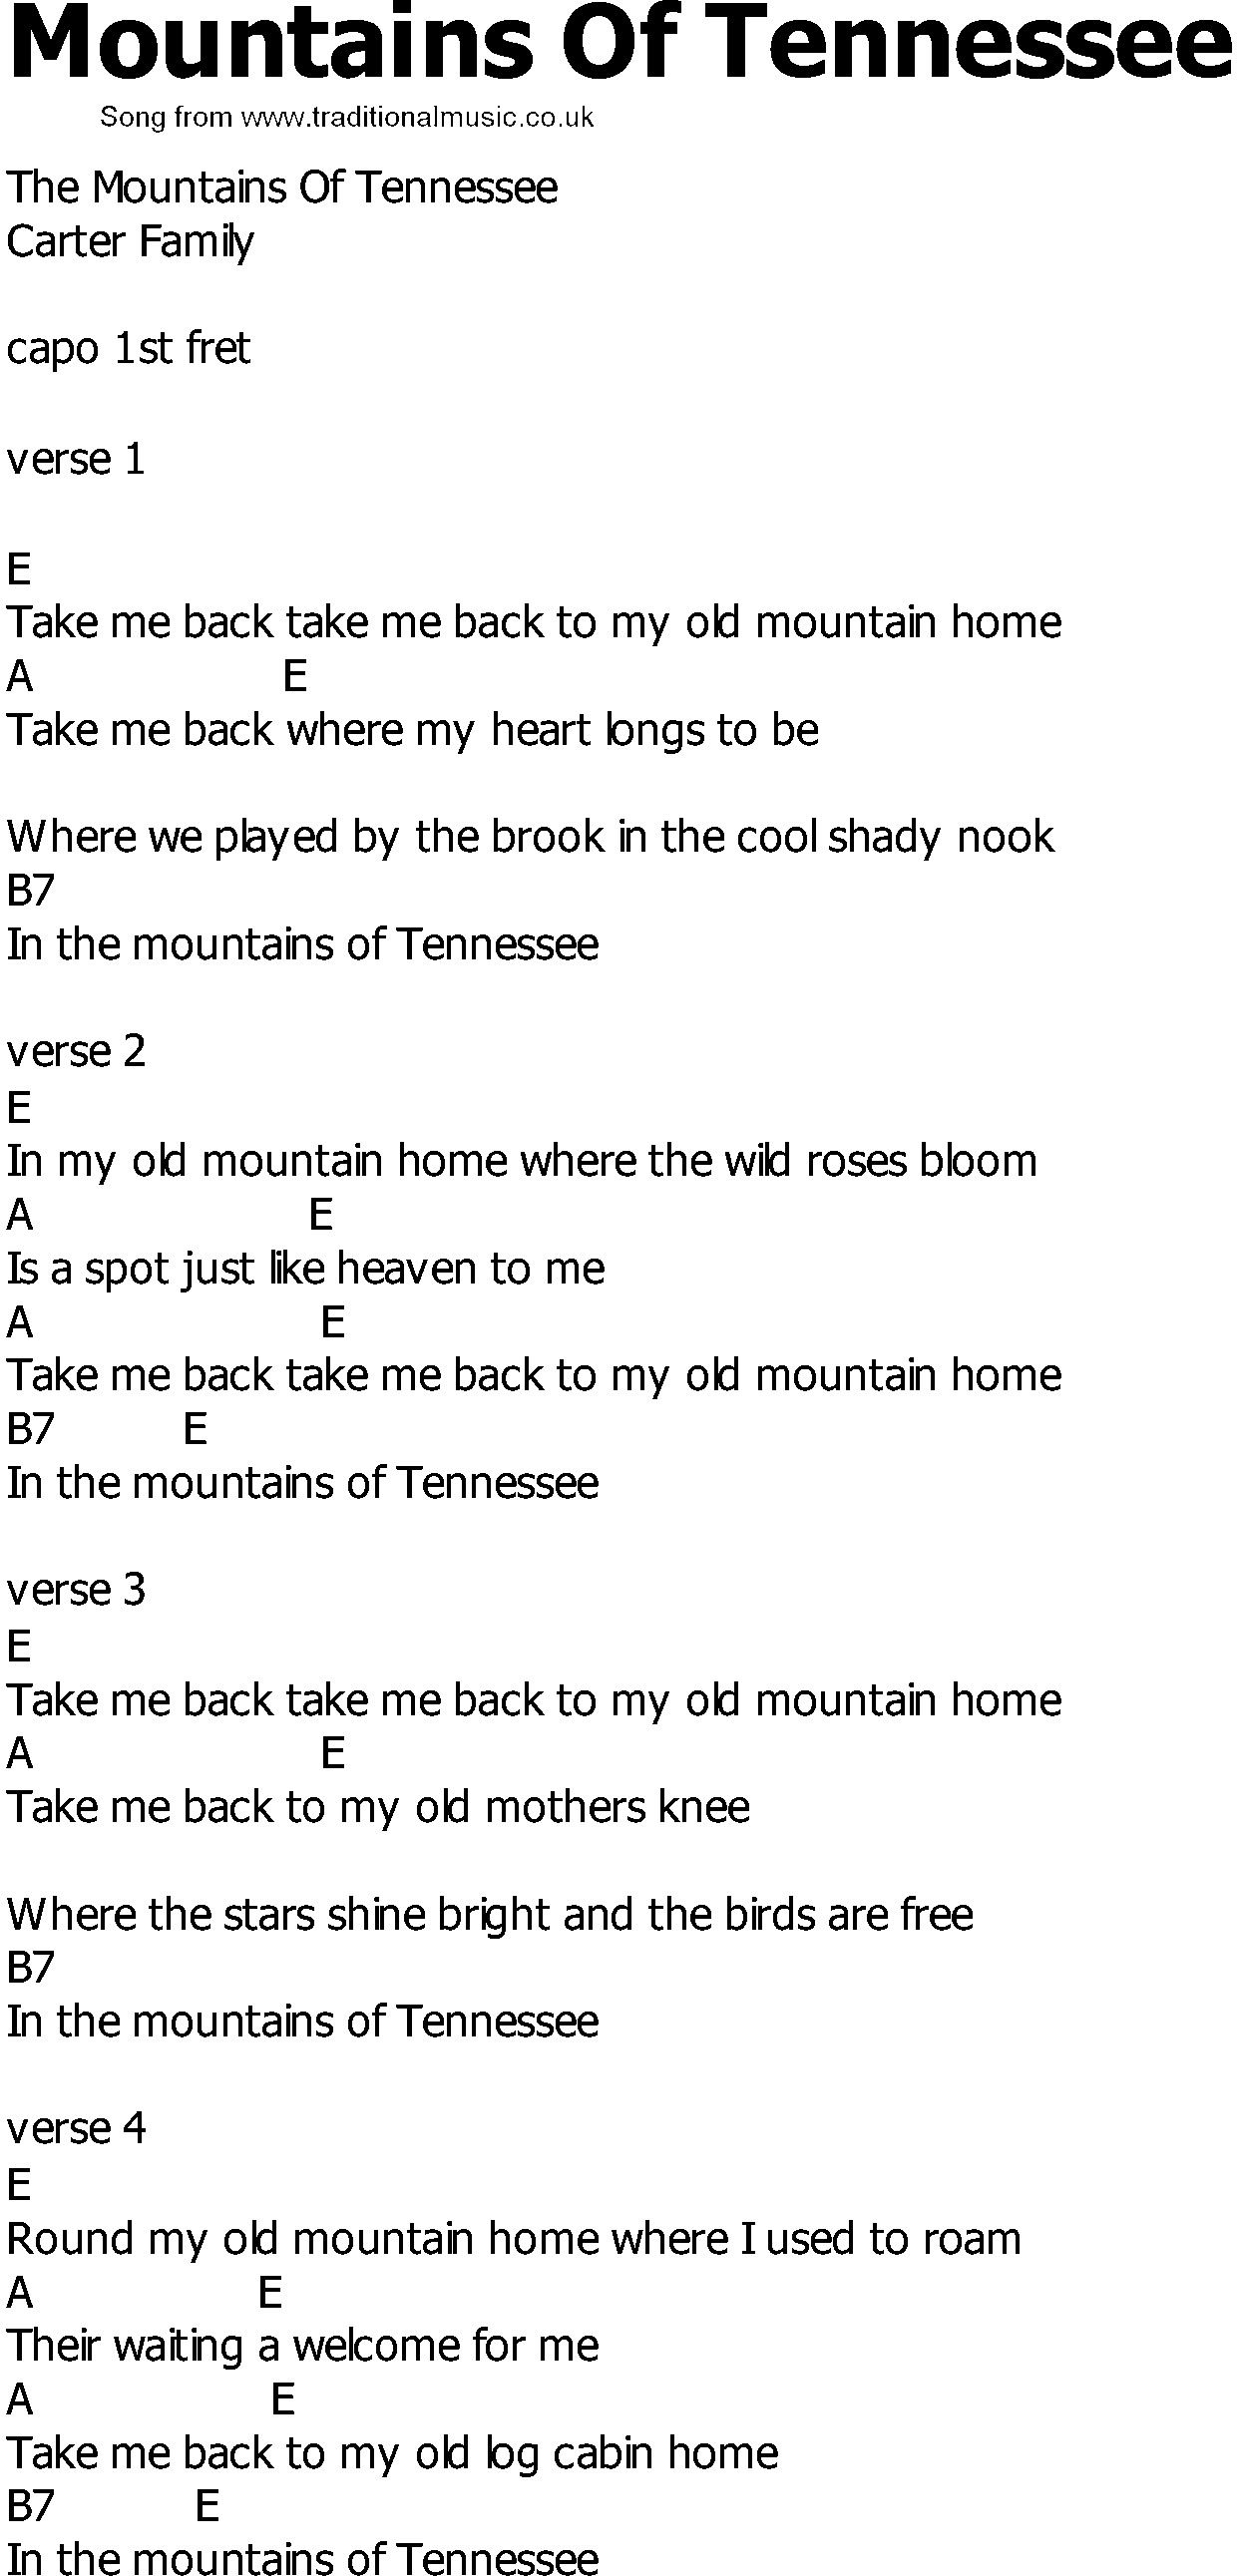 Old Country song lyrics with chords - Mountains Of Tennessee